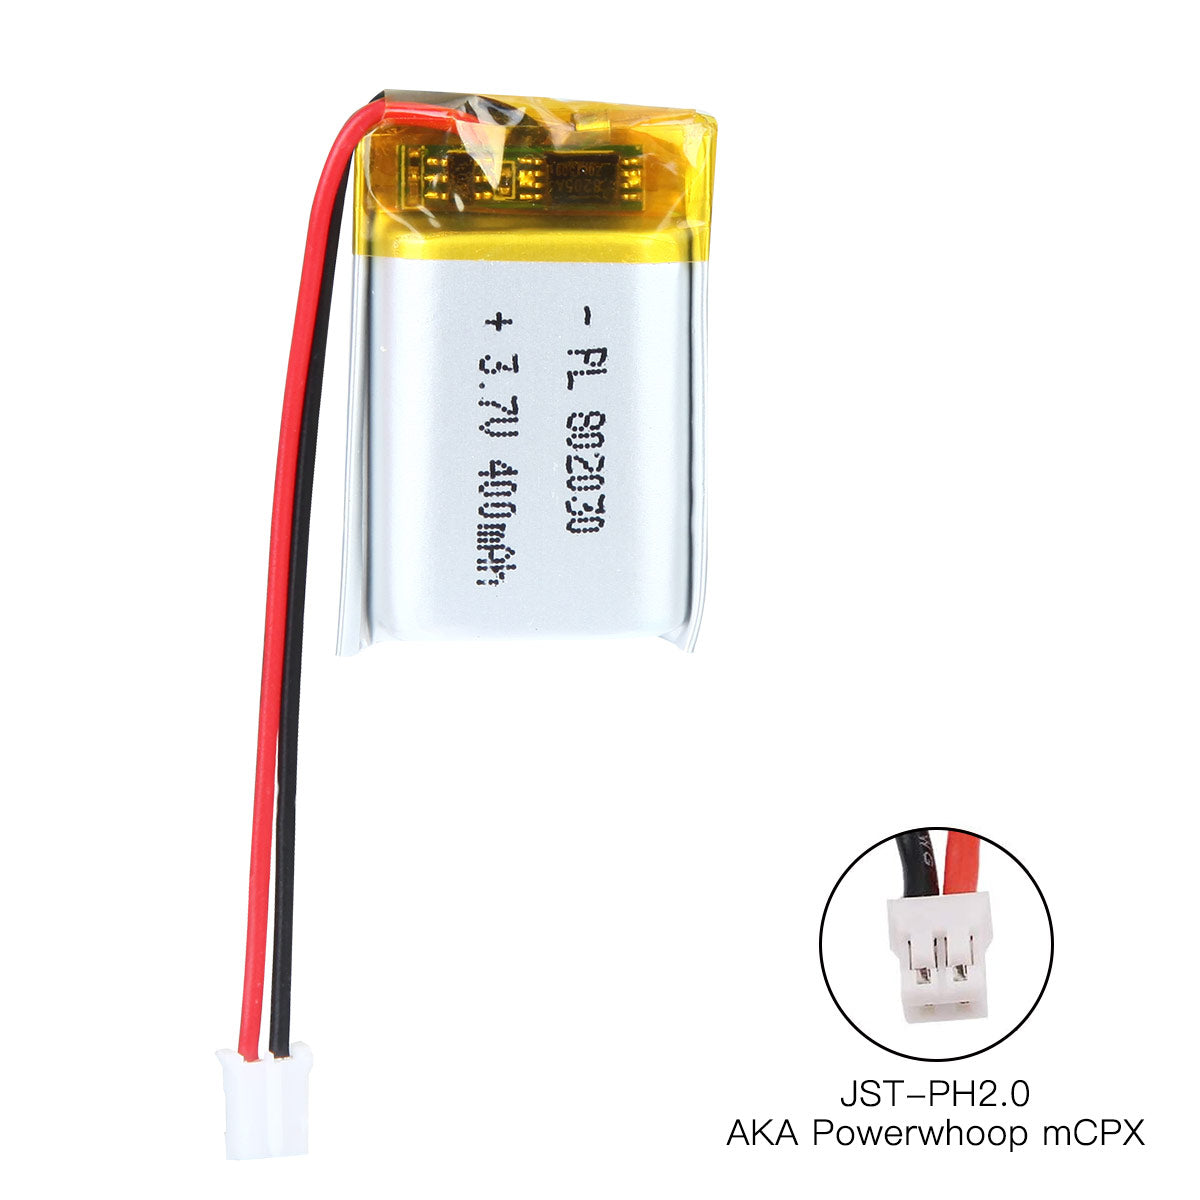 YDL 3.7V 400mAh 802030 Rechargeable Lithium Polymer Battery